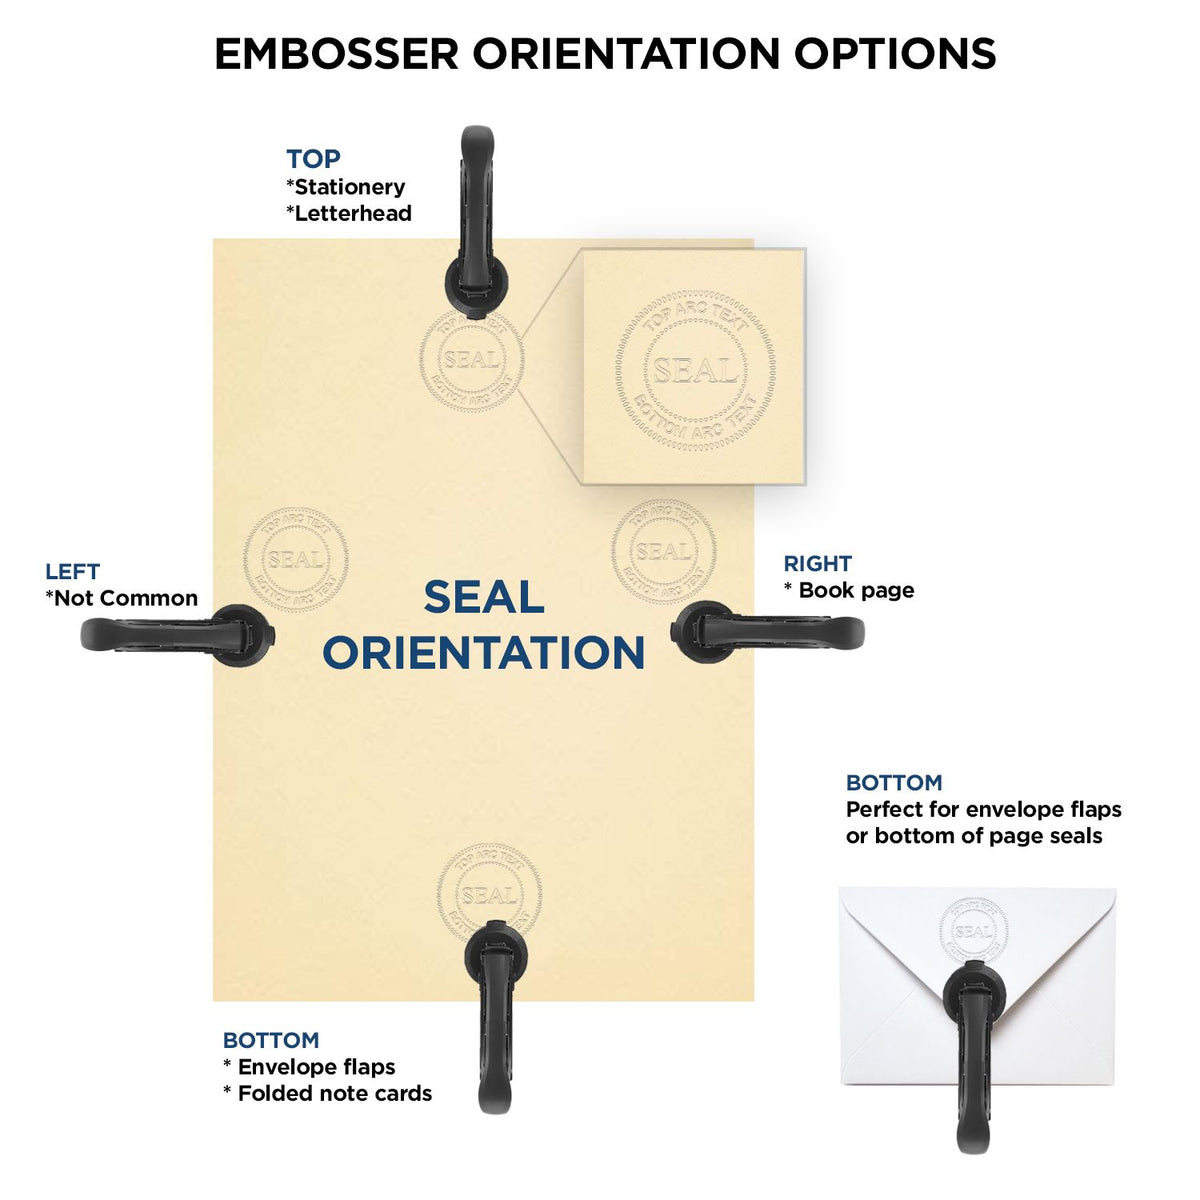 An infographic for the Heavy Duty Cast Iron Florida Architect Embosser showing embosser orientation, this is showing examples of a top, bottom, right and left insert.